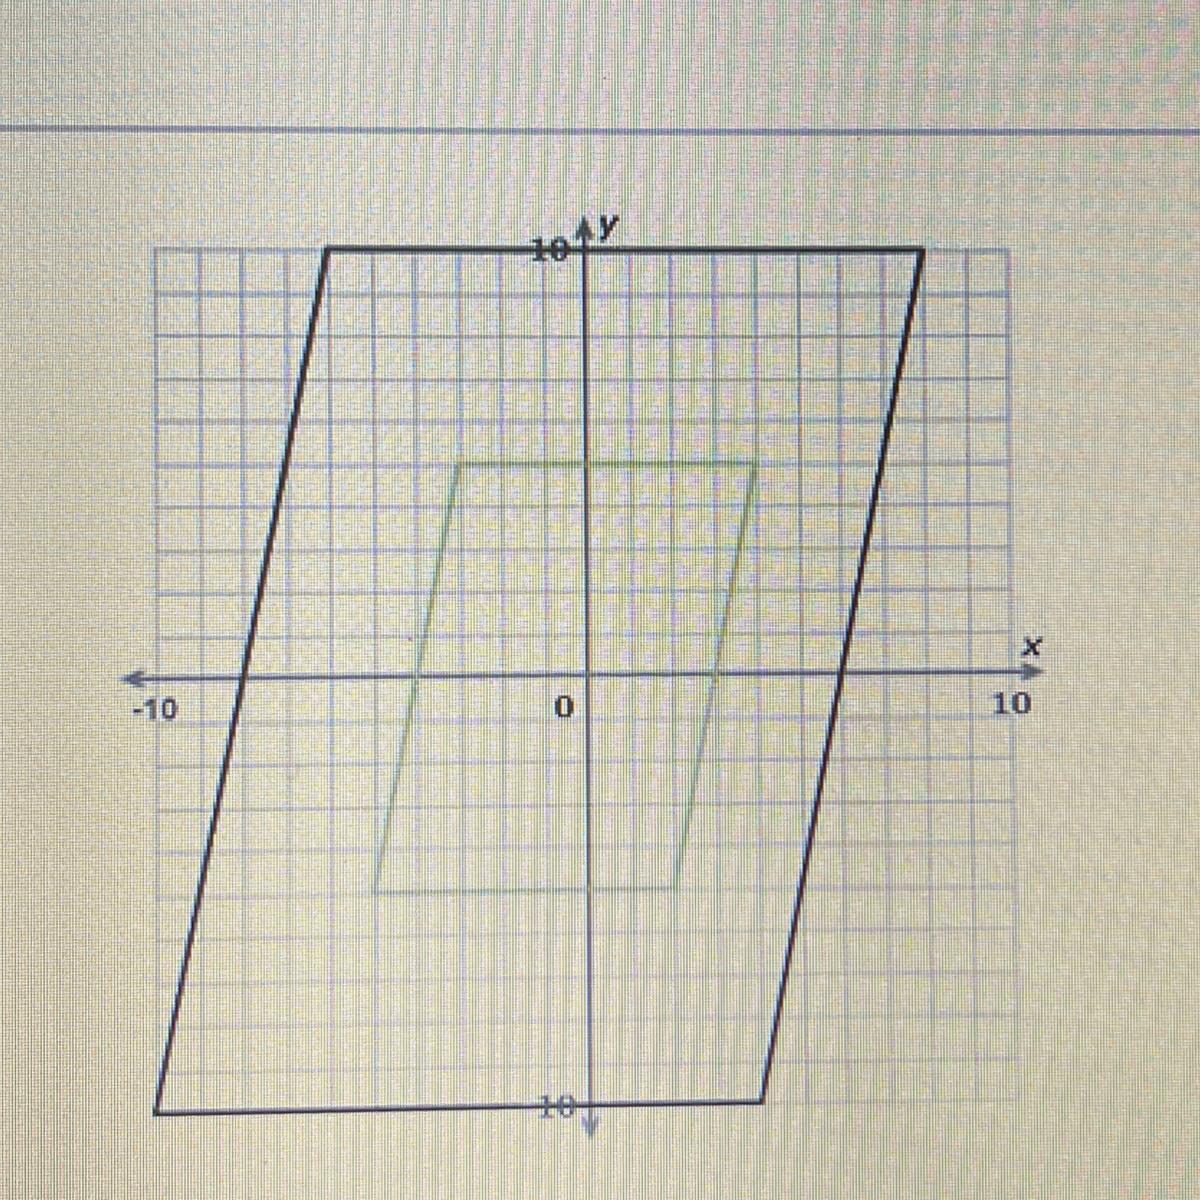 The Green Parallelogram Is A Dilation Of The Black Parallelogram. What Is The Scale Factor Of The Dilation?